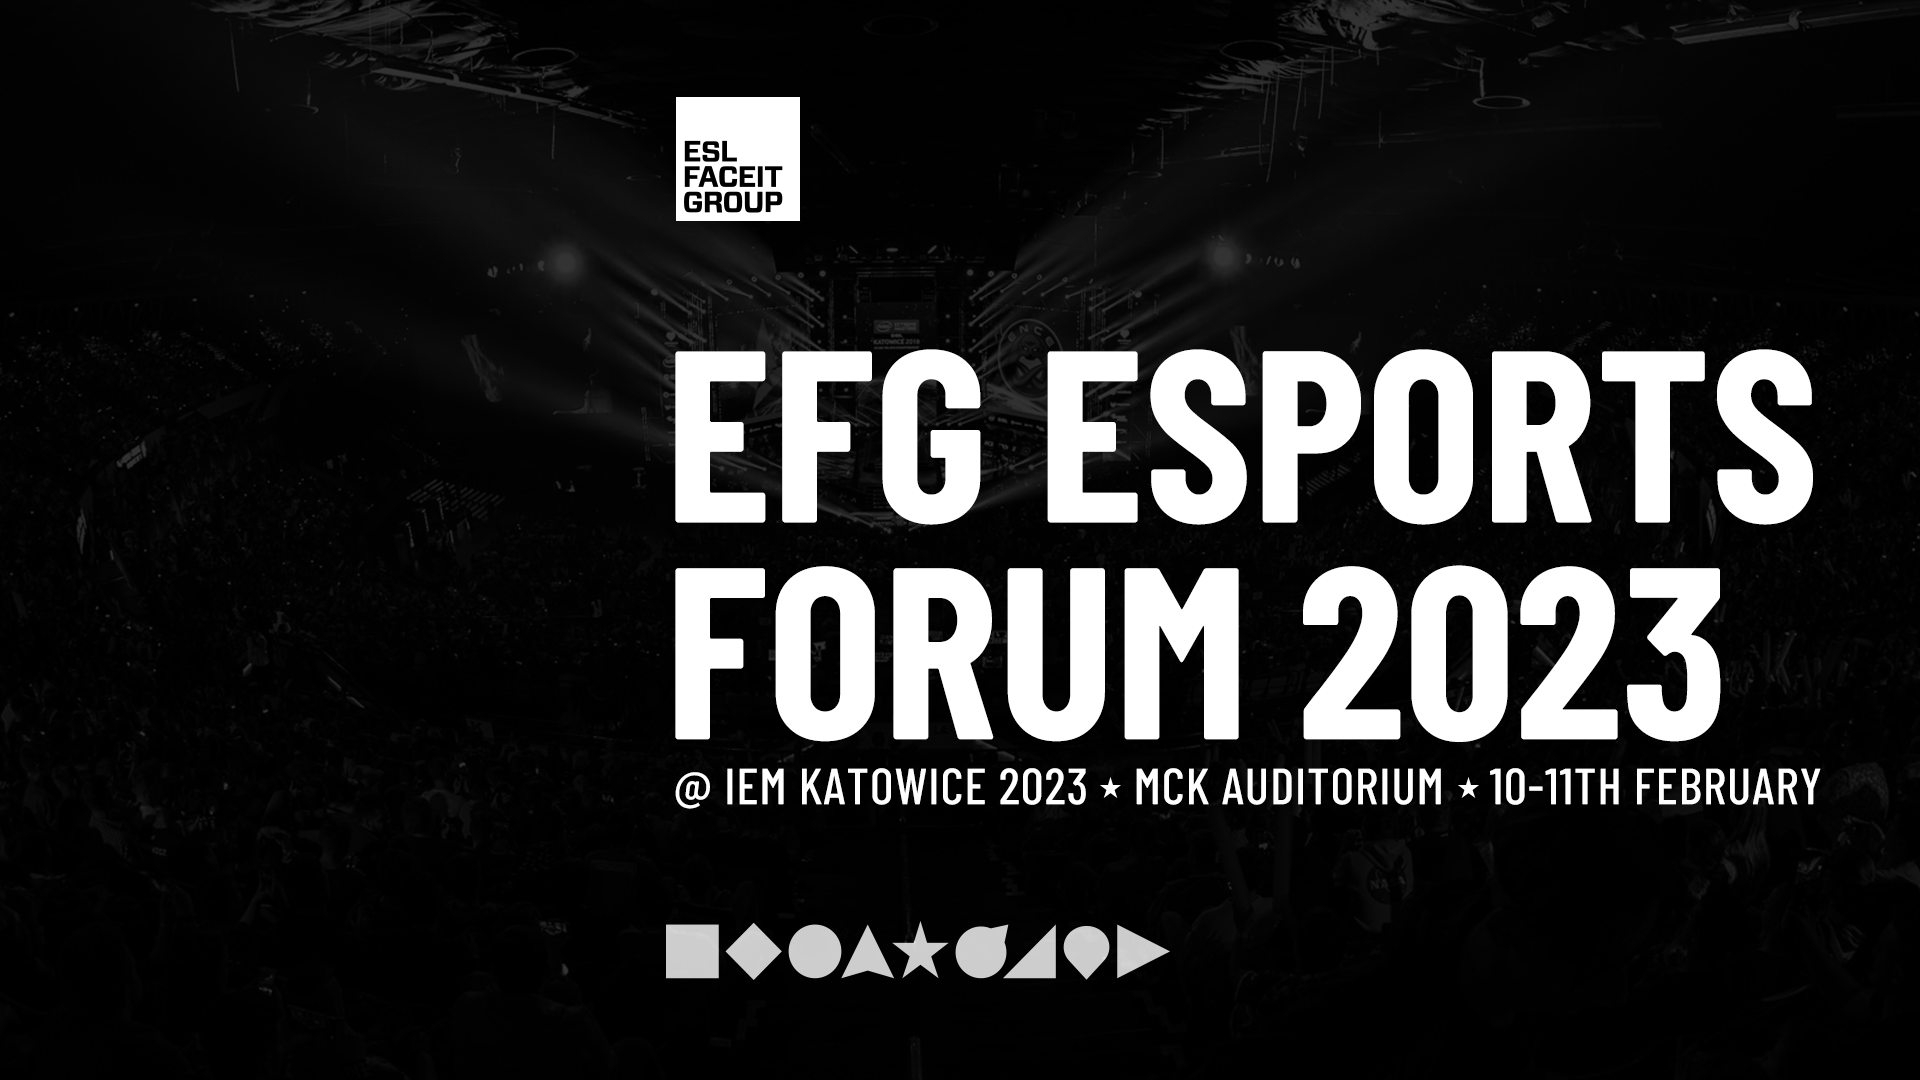 EFG Esports Forum focused on elevating the future of the industry to accompany IEM Katowice in February